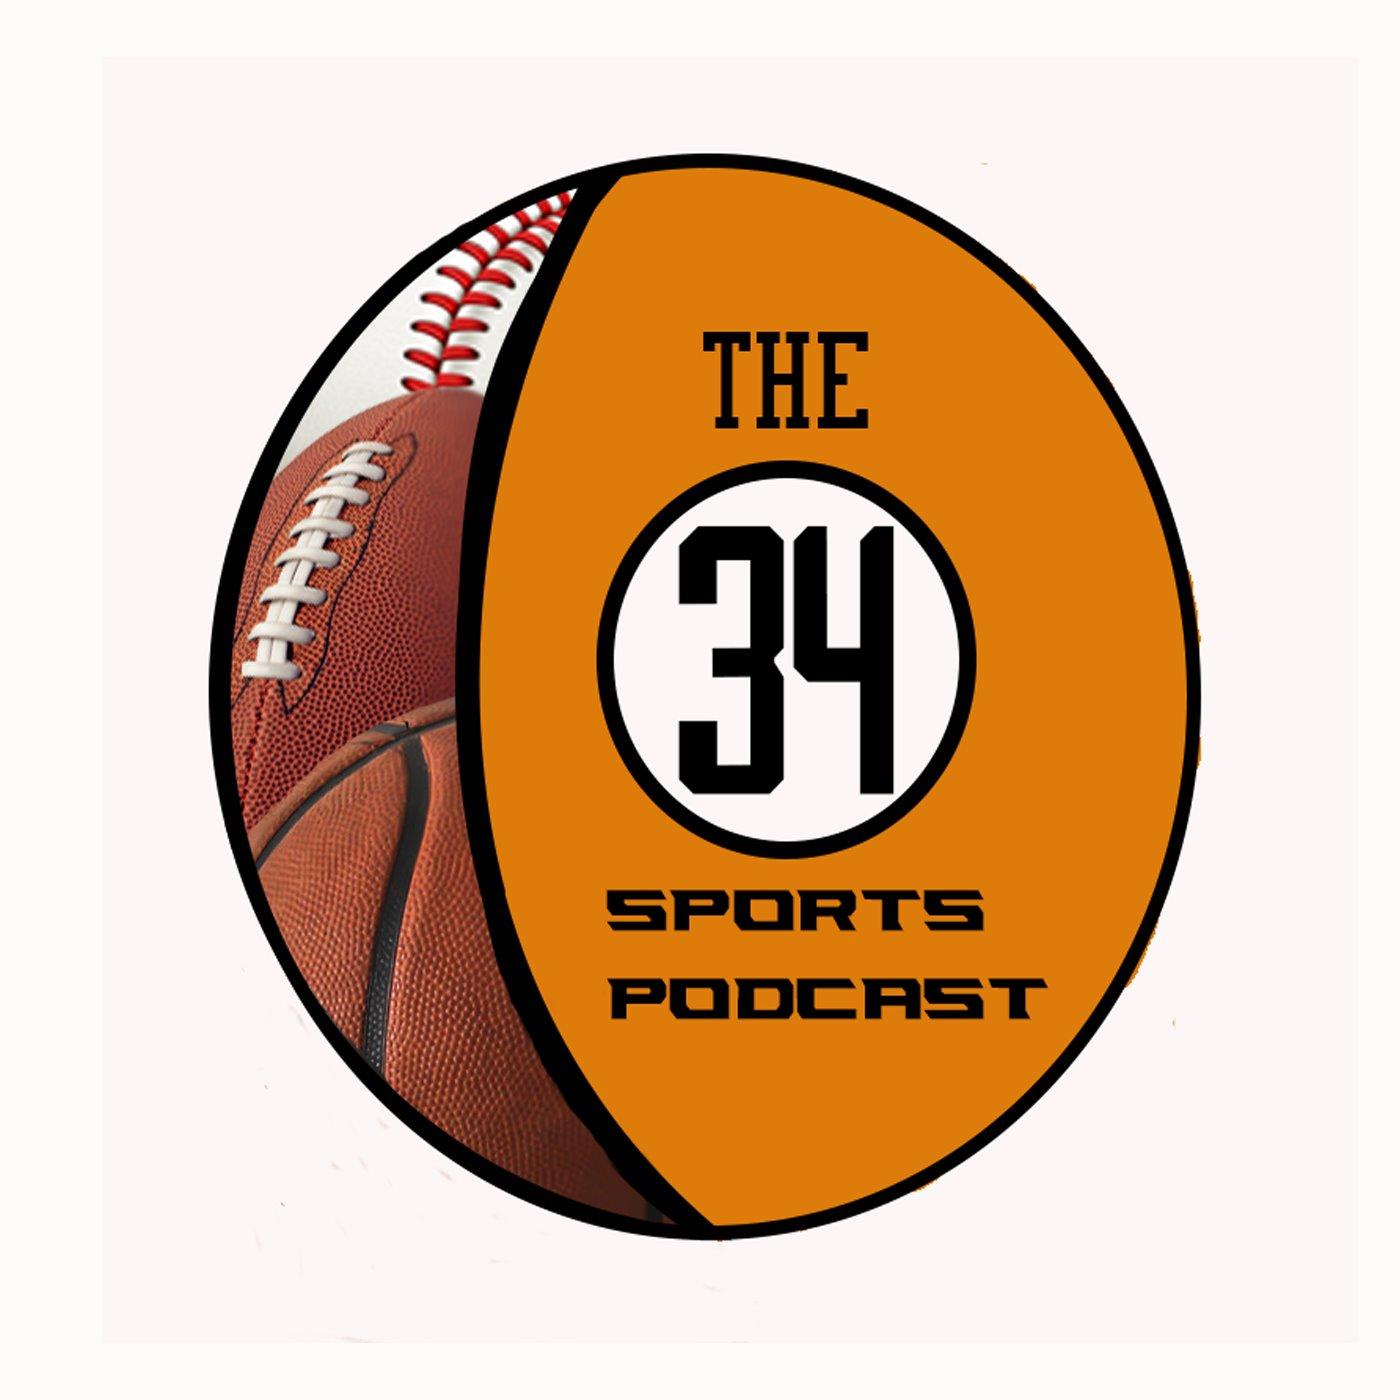 The 34 Sports Podcast